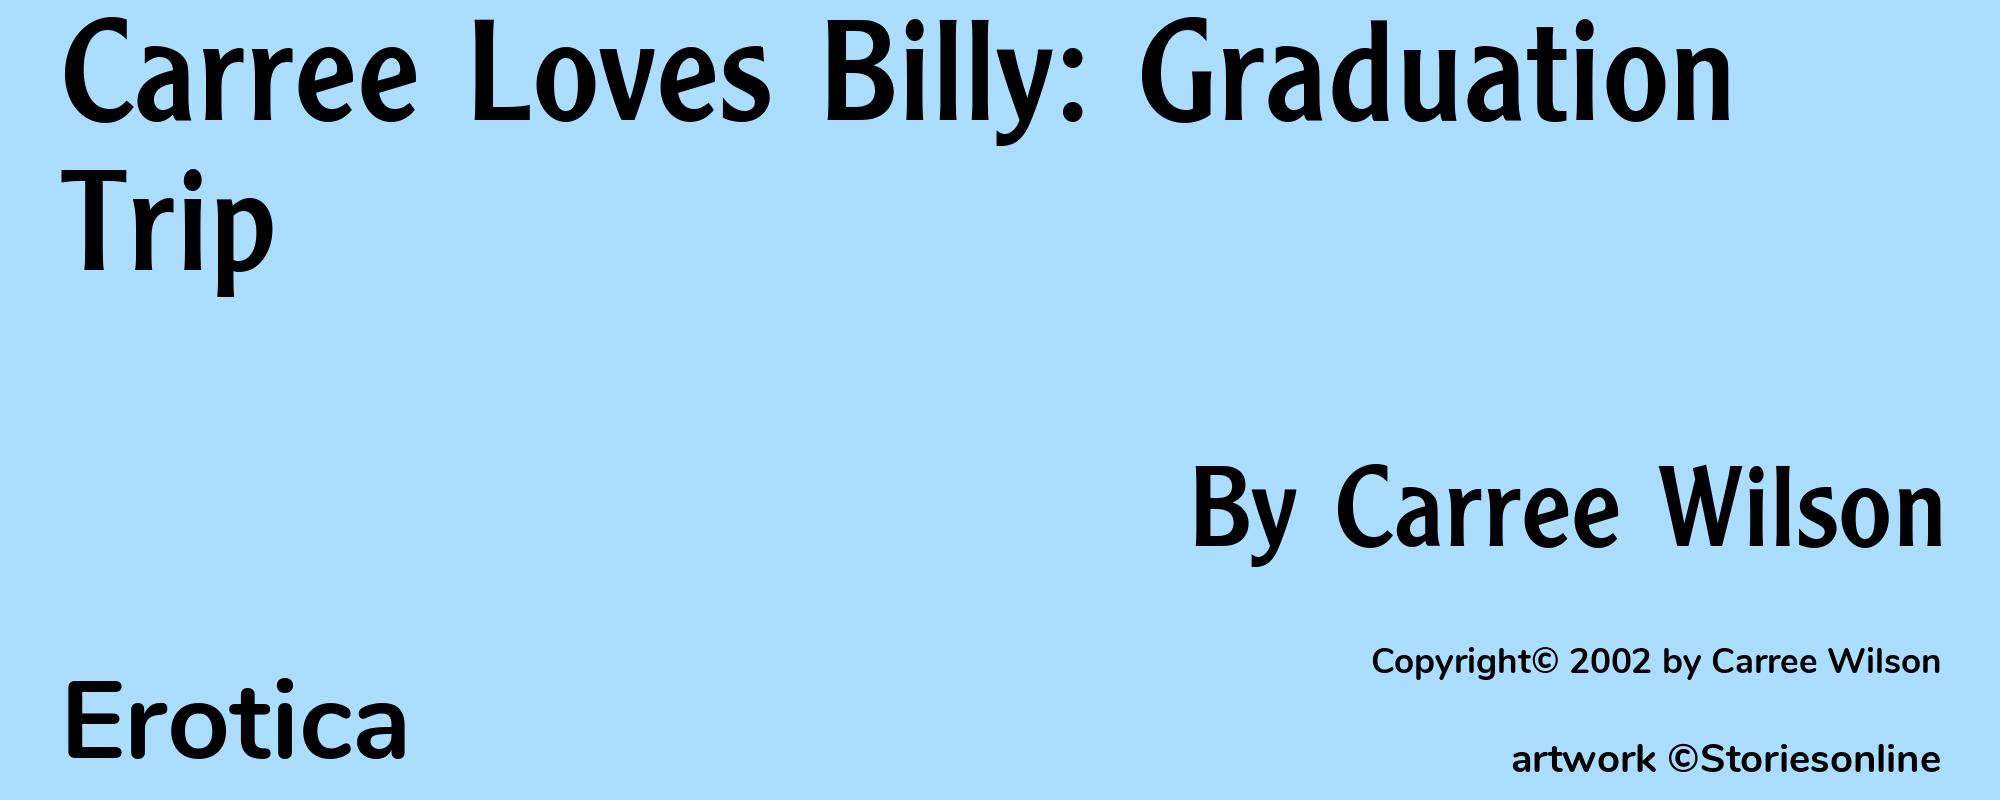 Carree Loves Billy: Graduation Trip - Cover